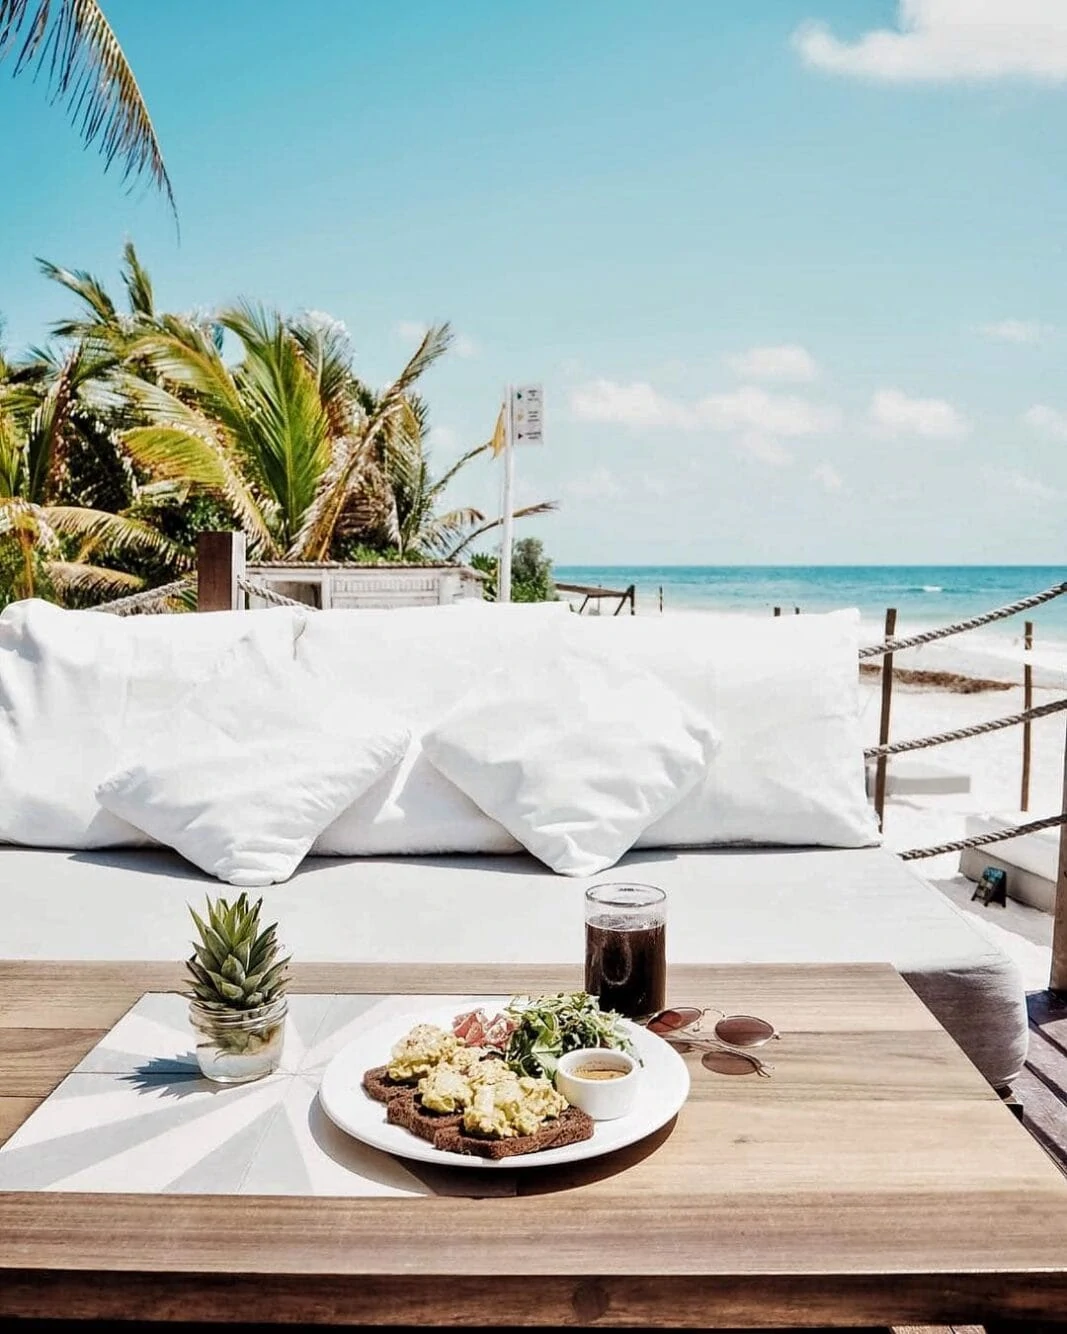 The essential Foodie's Guide to Tulum, Mexico: find out where to eat, play, shop, drink, and eat some more in the beachside paradise of Tulum!